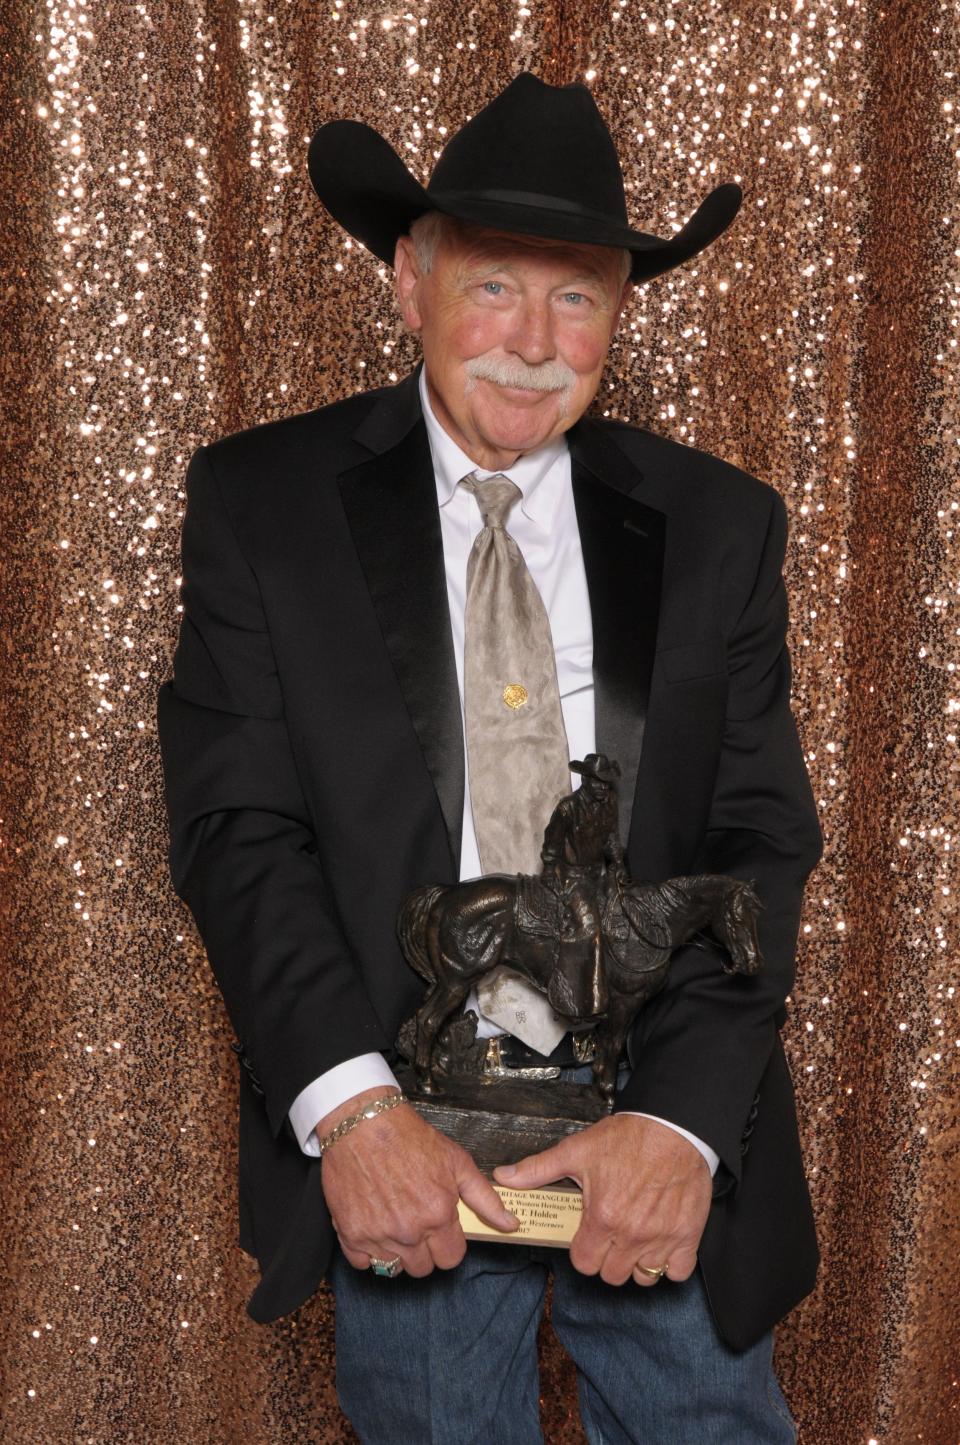 In 2017, Kremlin-based sculptor and painter Harold T. Holden became the first Oklahoma artist inducted into the National Cowboy & Western Heritage Museum's storied Hall of Great Westerners. Holden created the bronze "Wrangler" statue the museum gives to recipients of the honor.